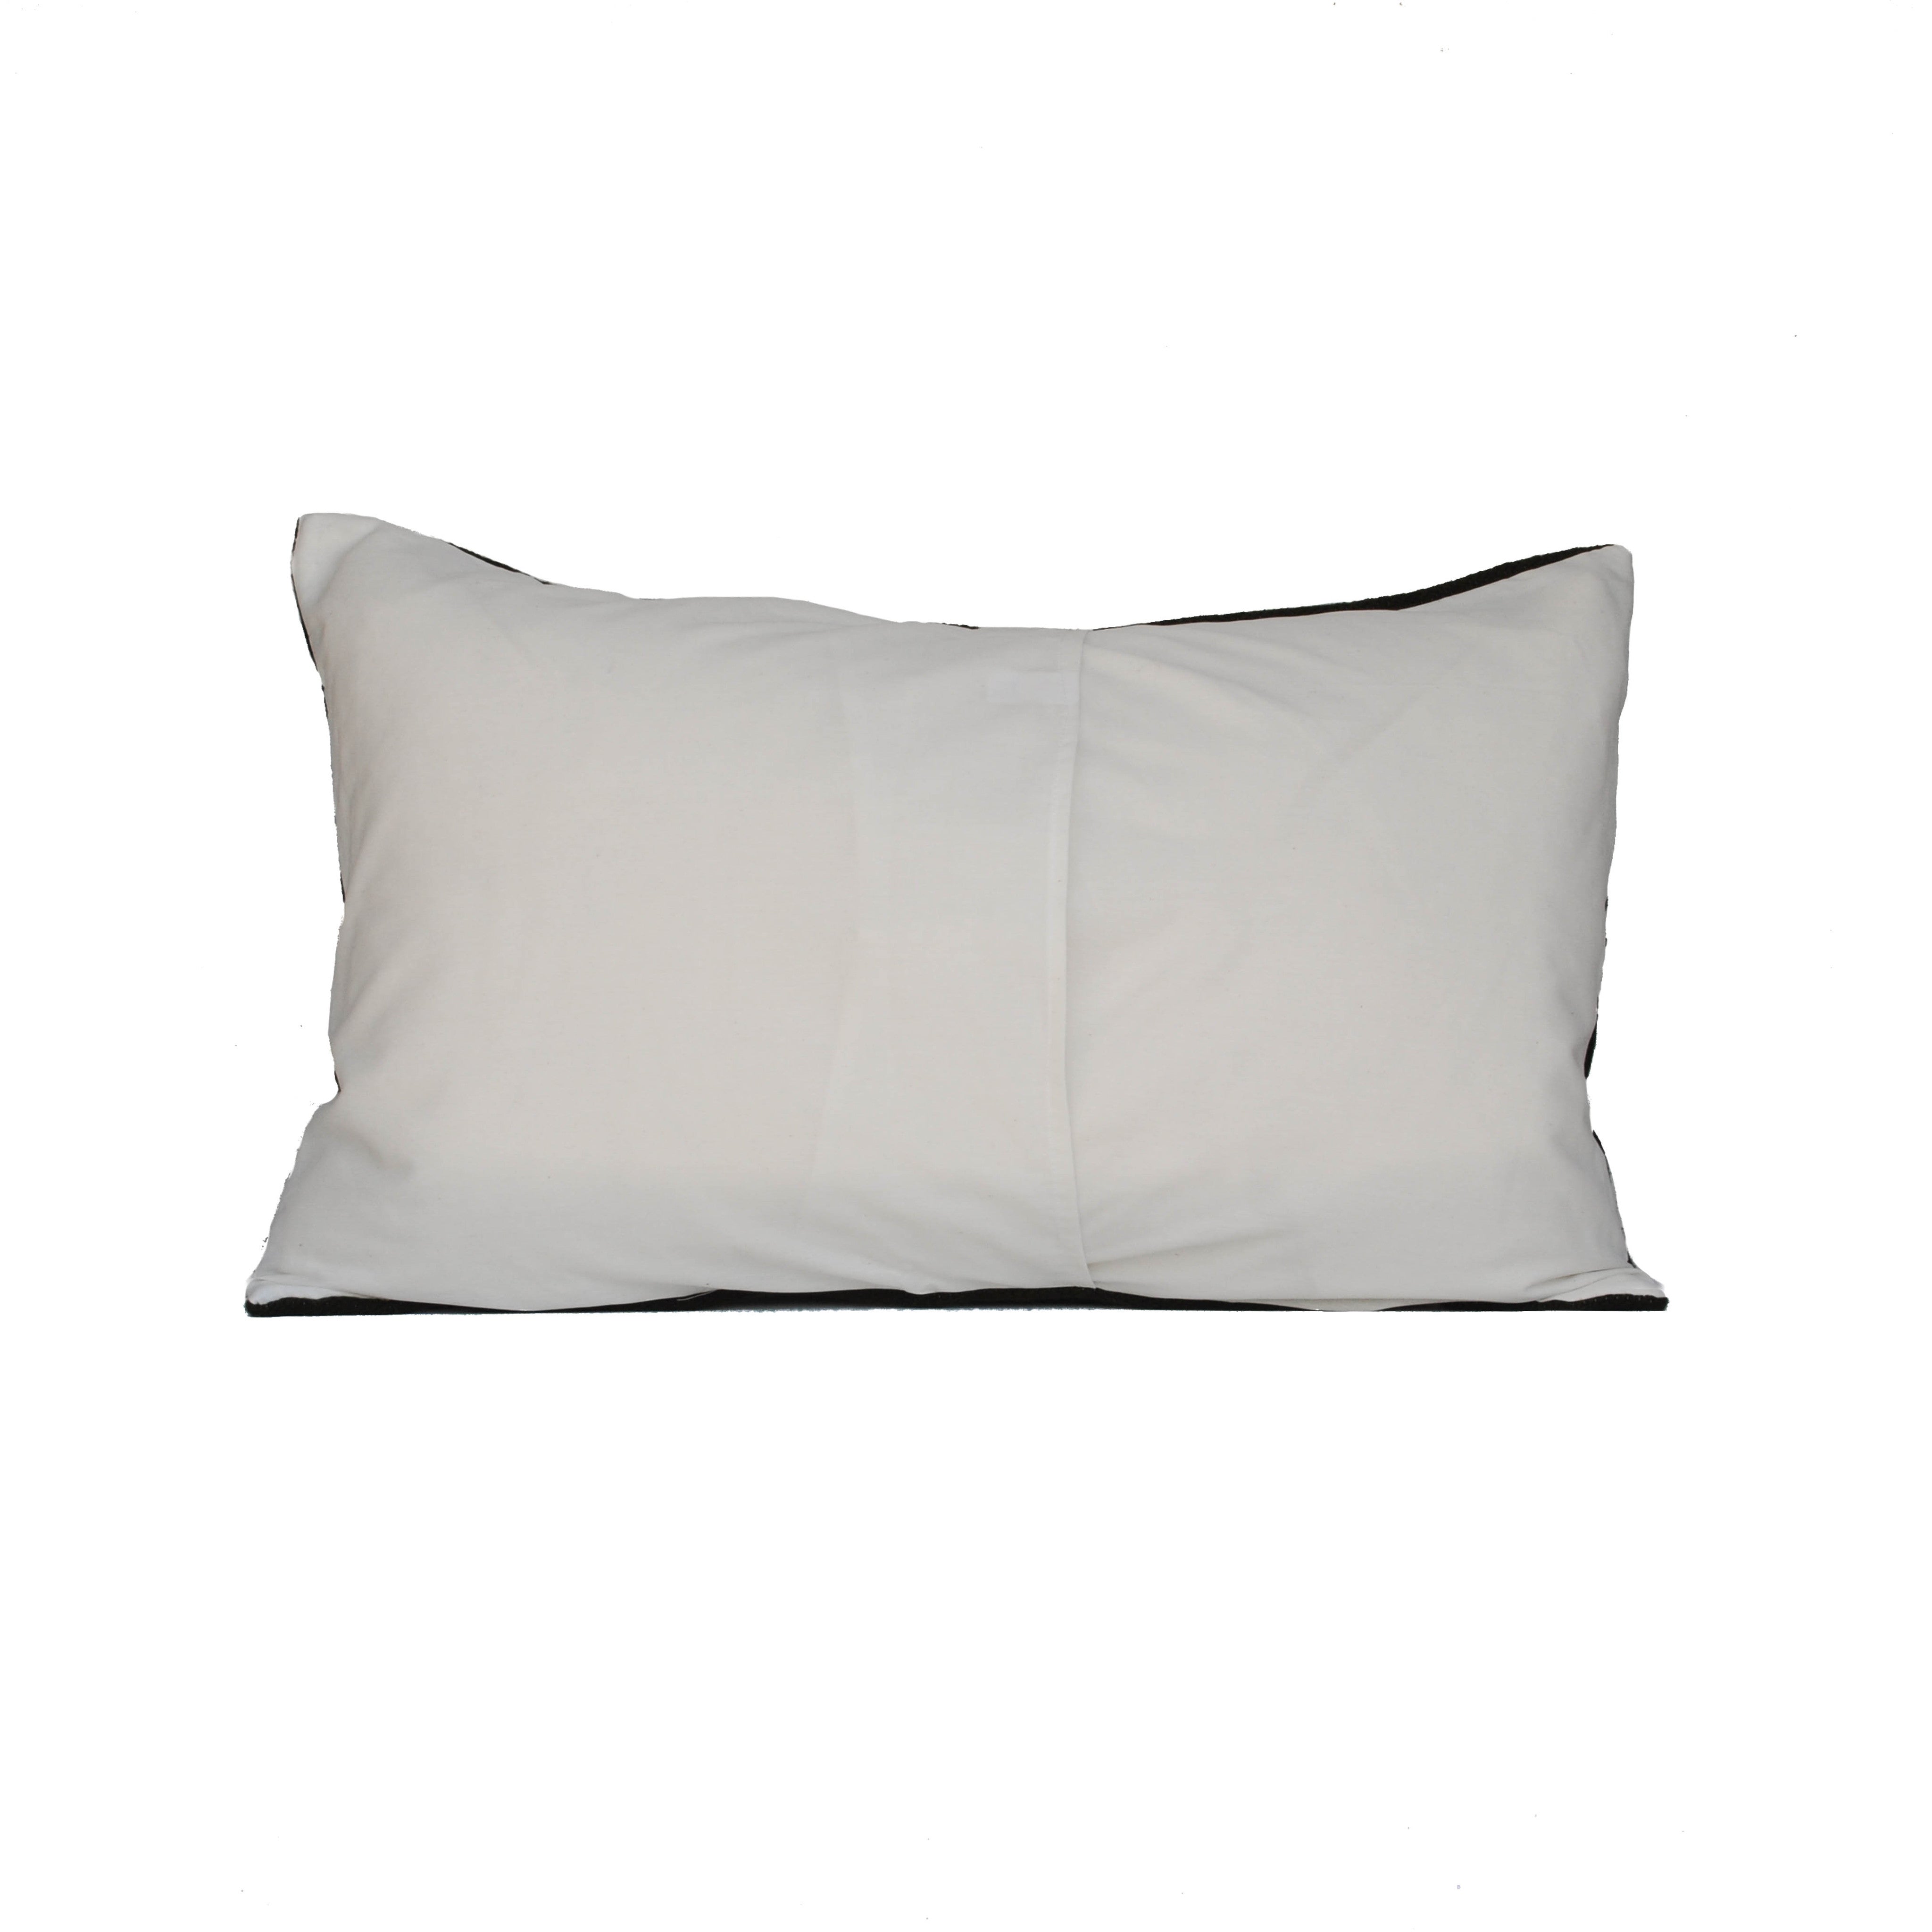 Horizon Pillow Cover - Olive